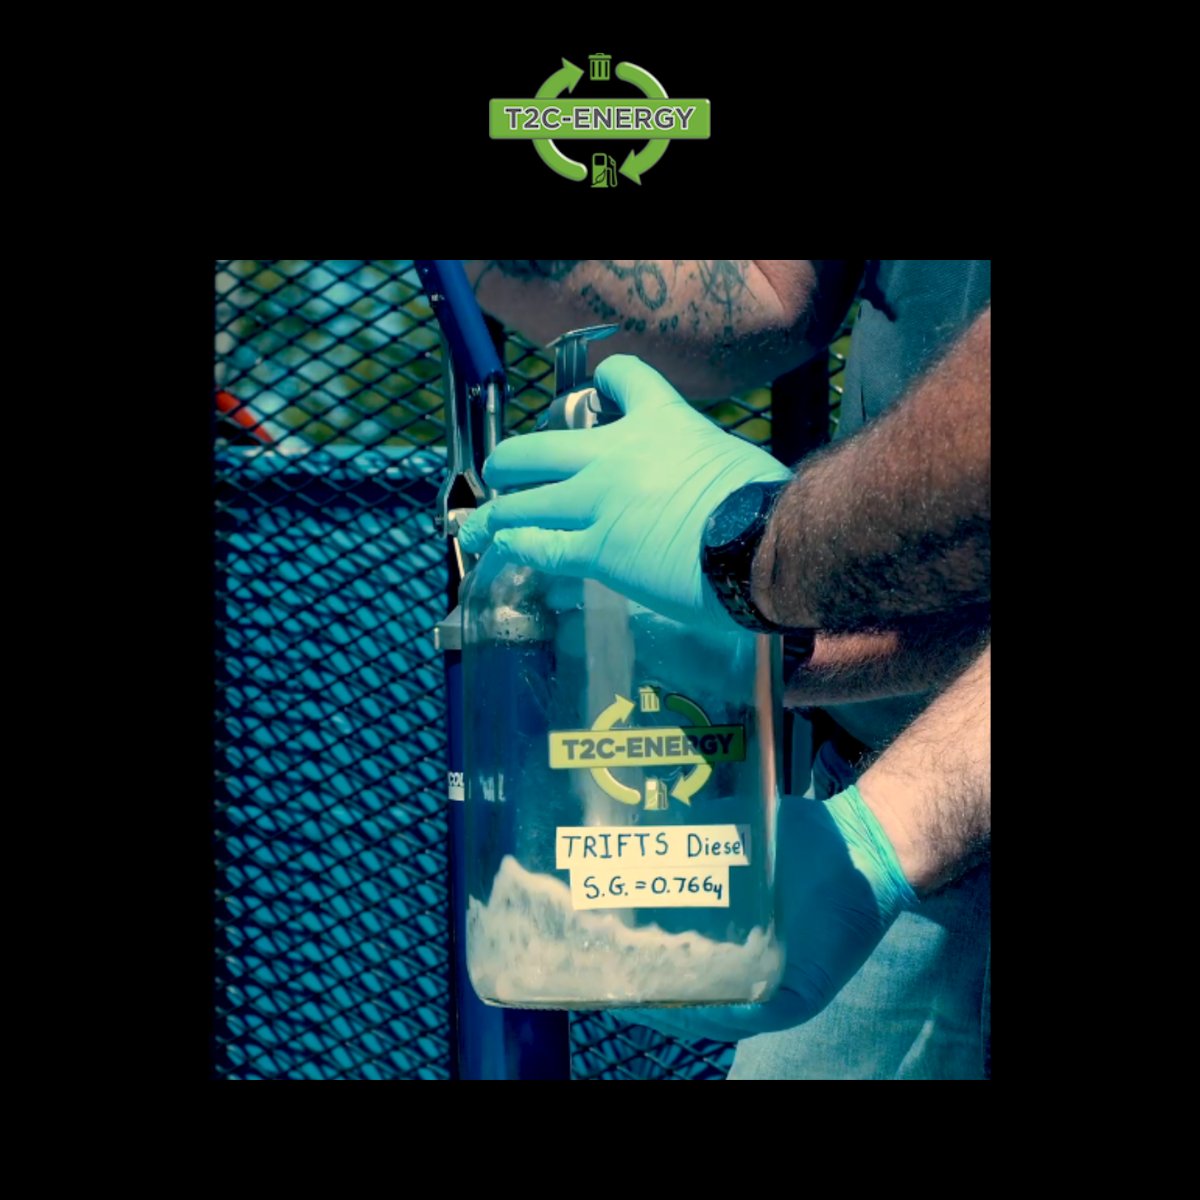 Just over here developing some TRIFTS diesel fuel.

Interested in learning more about our process?

Visit t2cenergy.com

#diesel #wastetofuel #t2cenergy